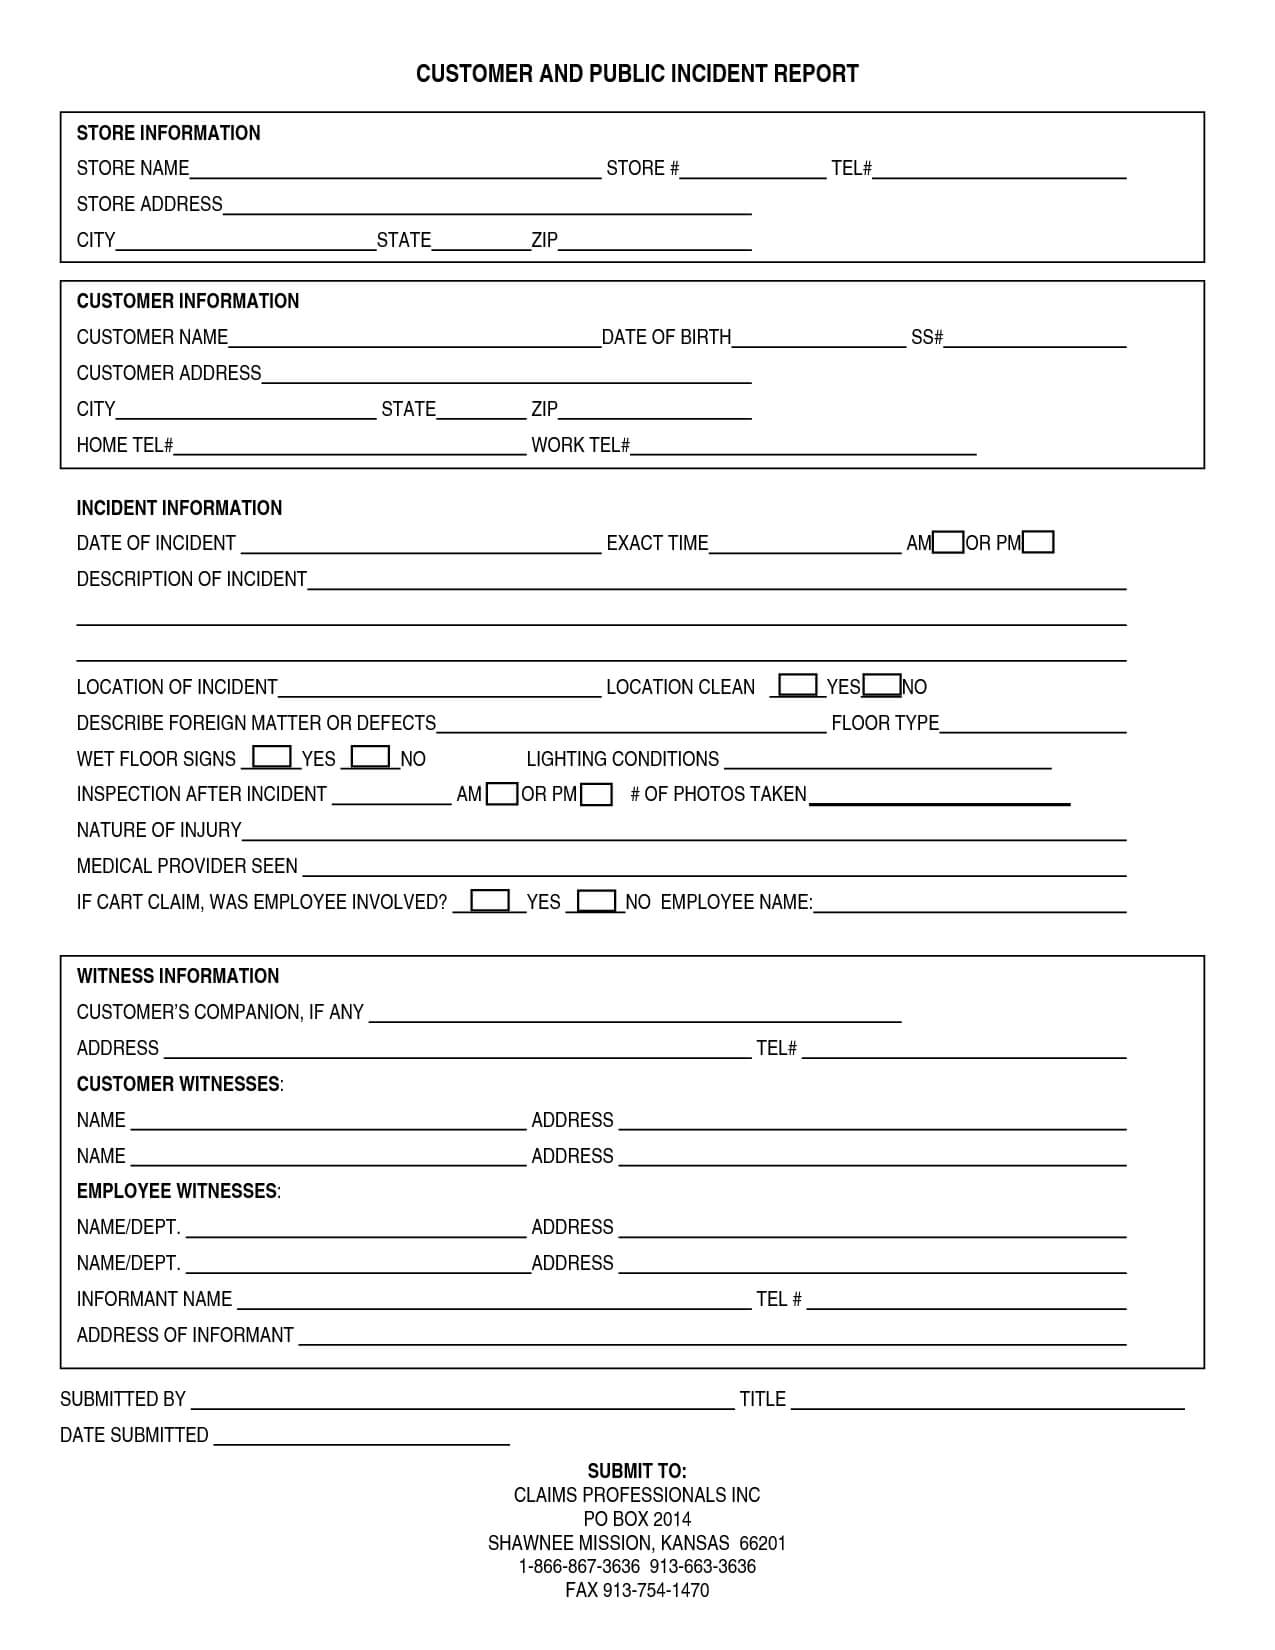 29 Images Of Customer Accident Report Template | Krydia With Customer Incident Report Form Template